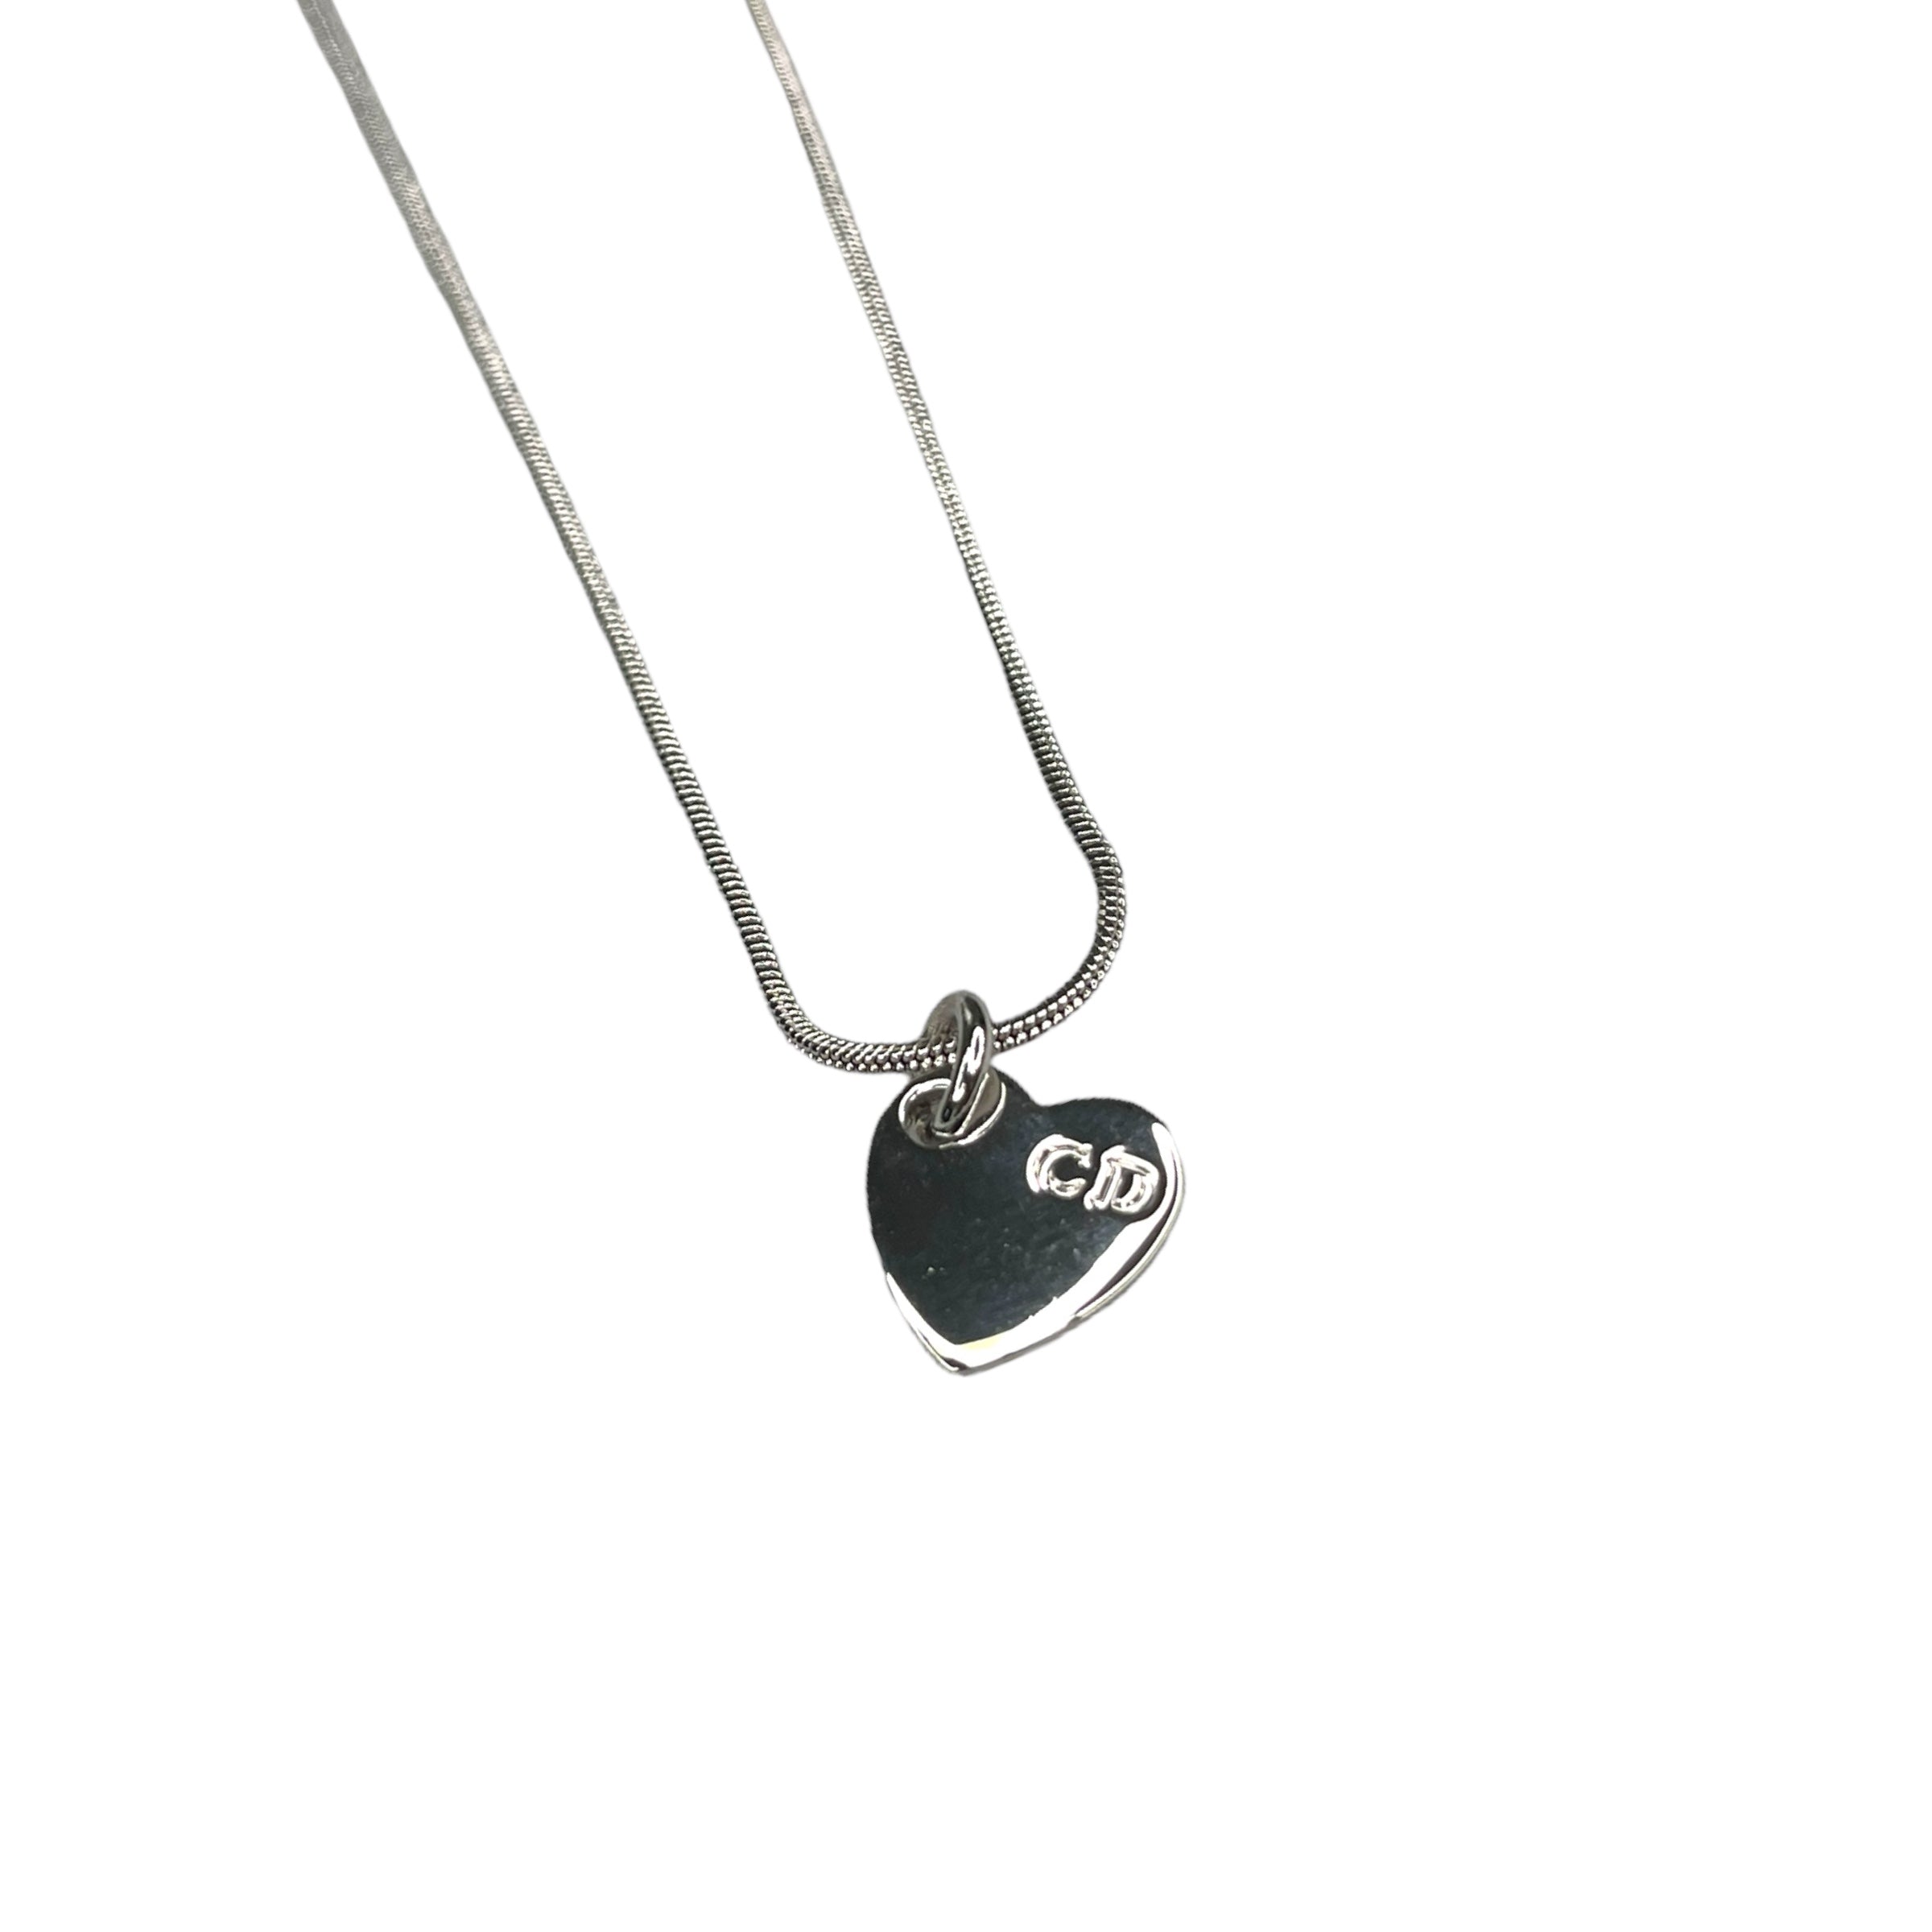 DIOR CD ENGRAVED HEART PENDANT NECKLACE